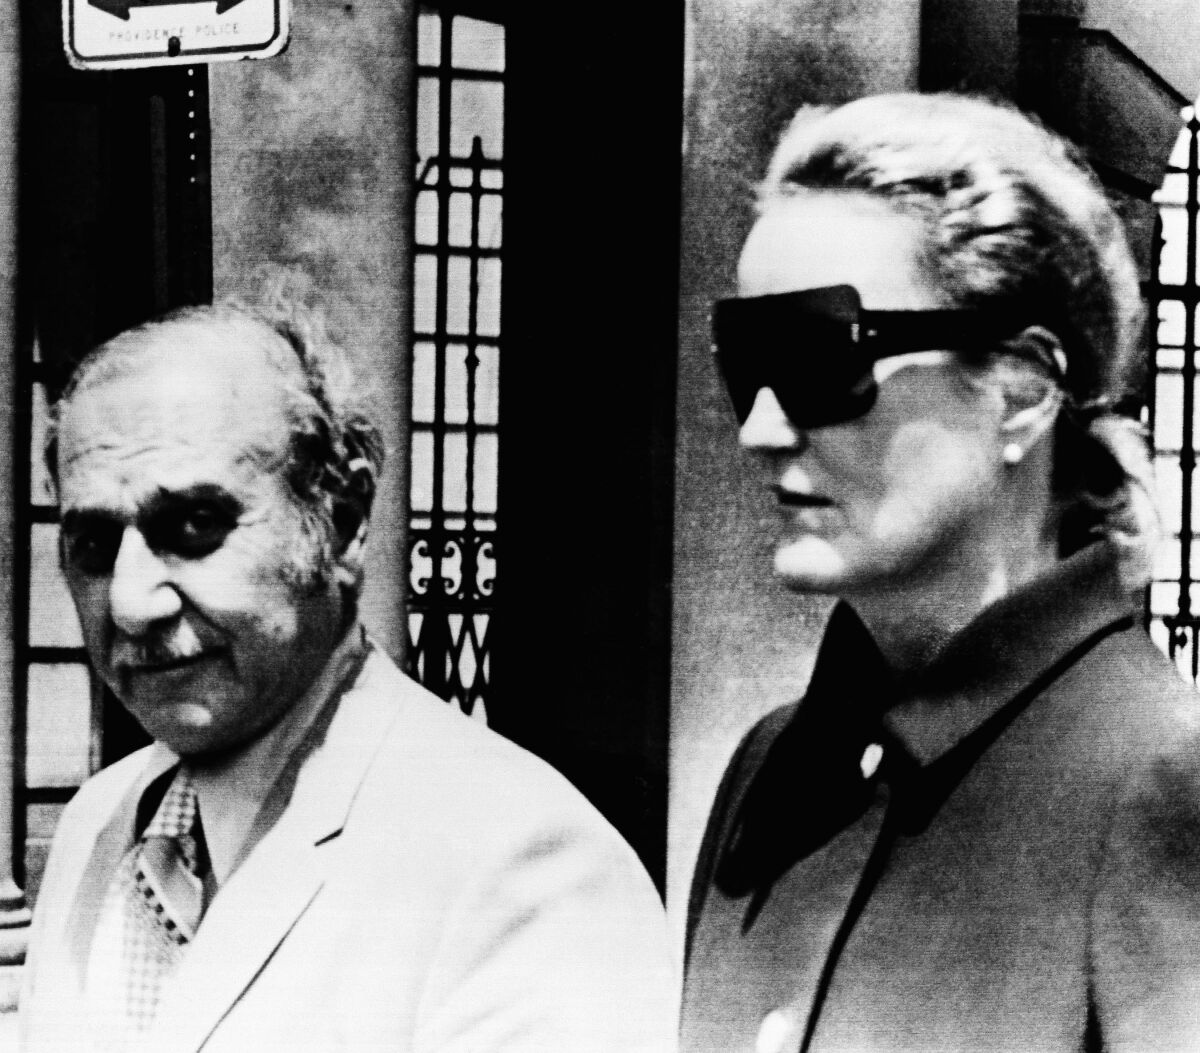 FILE - In this June 17, 1971 file photo, heiress Doris Duke and her attorney Aram Arabian, leave Superior Court in Providence, R.I. When Duke, the fabulously wealthy tobacco and power company heir, ran over and killed a longtime employee and confidant at her Newport, R.I. mansion in 1966, many people never bought the official police report that the death was an "unfortunate accident." Peter Lance's book "Homicide at Rough Point" released earlier this year concluded that Duke literally got away with murder in the death of Eduardo Tirella. (AP Photo, File)